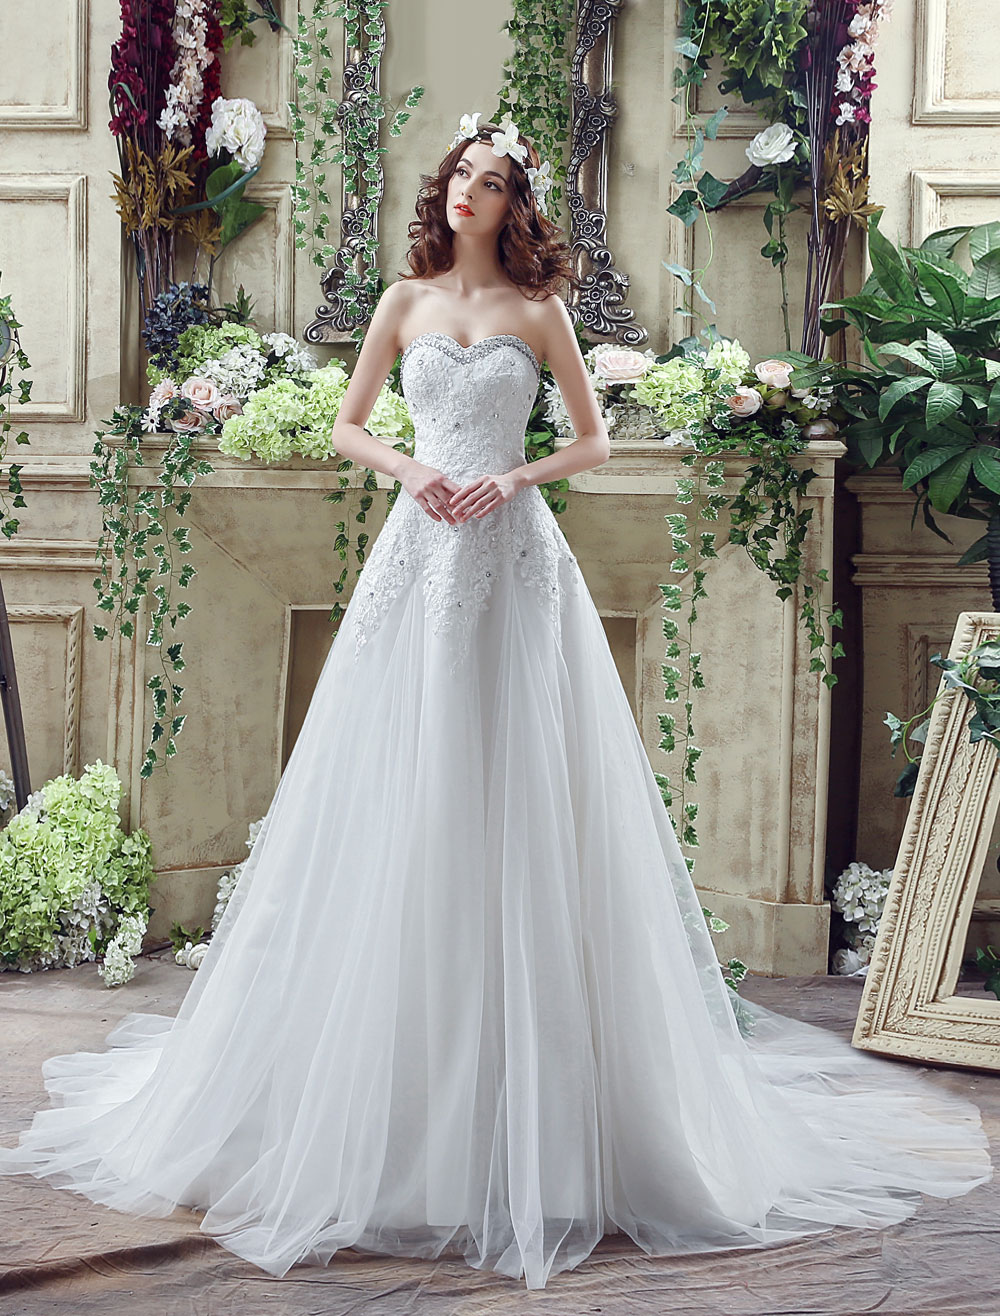 Great Tulle Wedding Dresses  The ultimate guide 